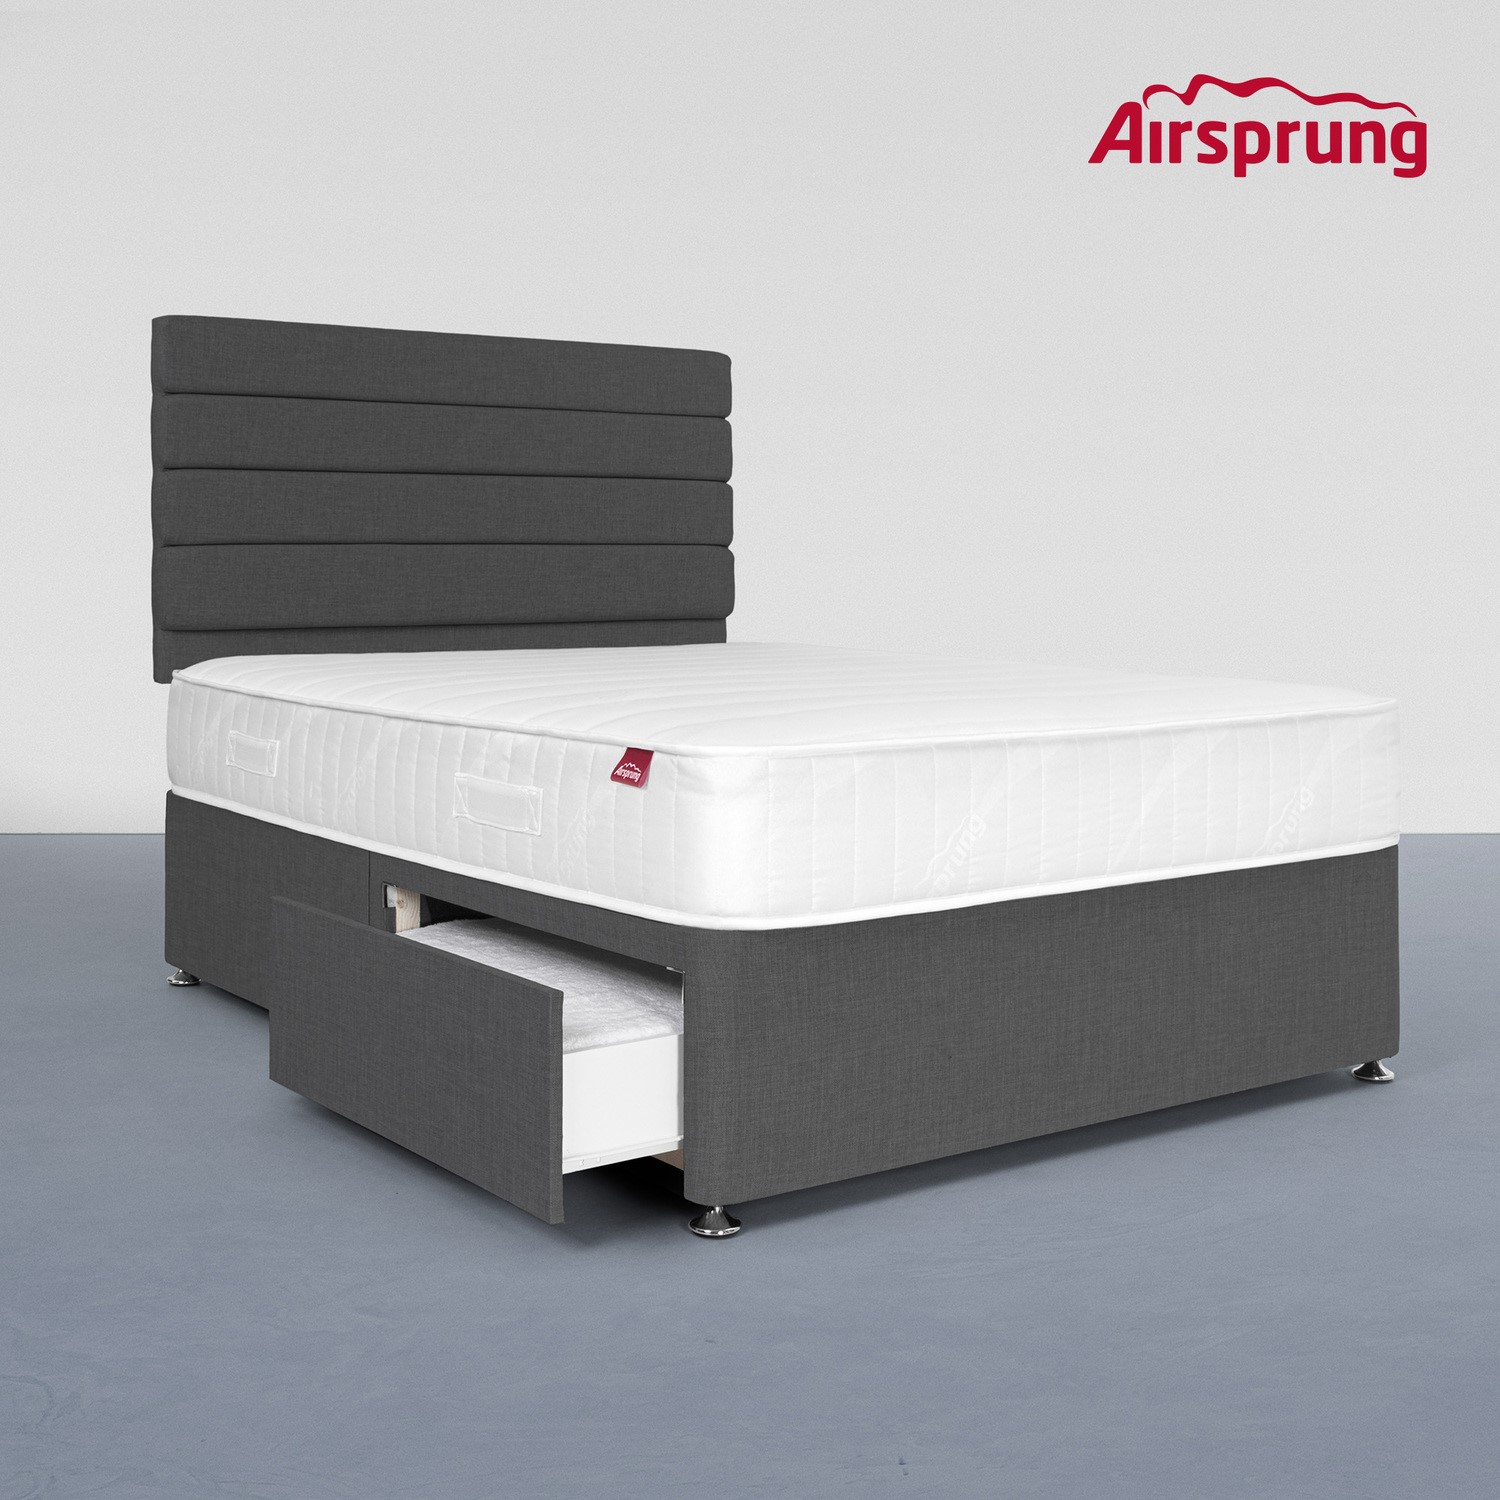 Read more about Airsprung double 2 drawer divan bed with hybrid mattress charcoal